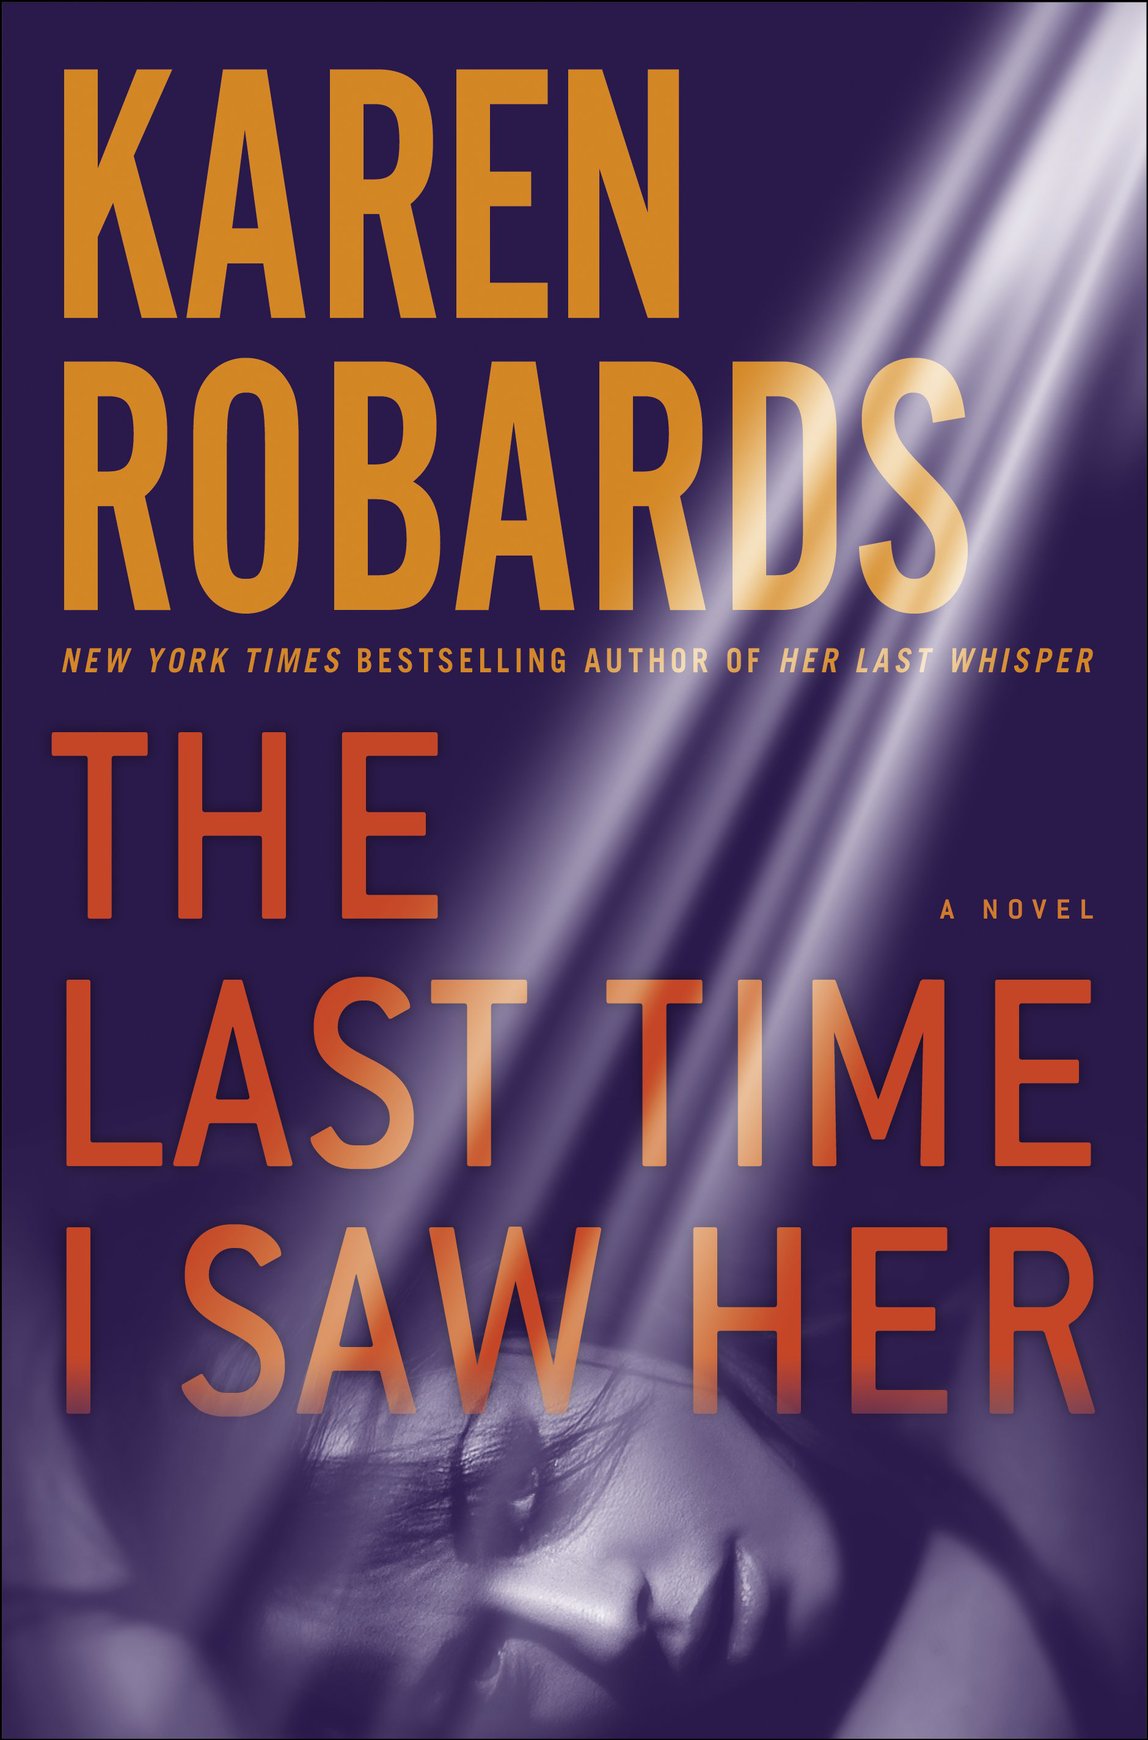 The Last Time I Saw Her (2015) by Karen Robards